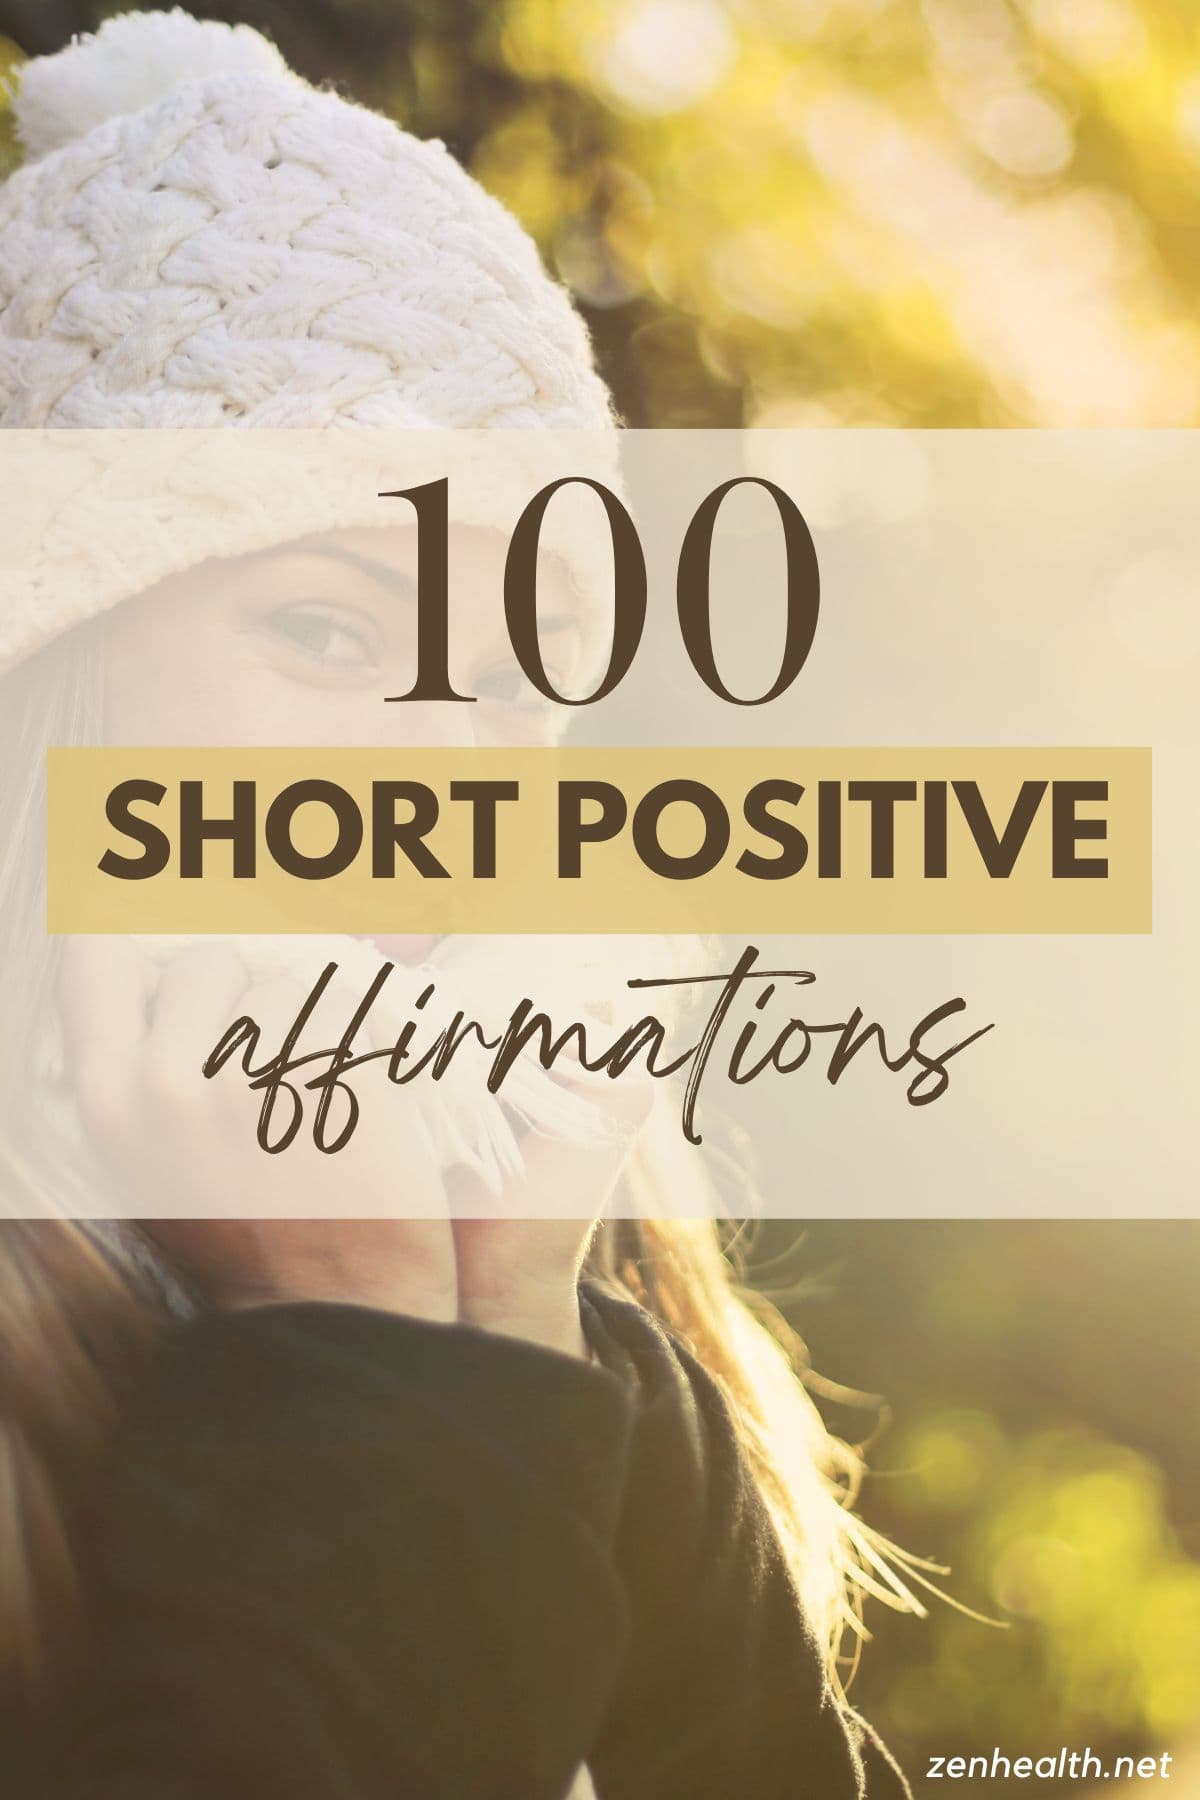 100 short positive affirmations text overlay on a photo of a woman smiling